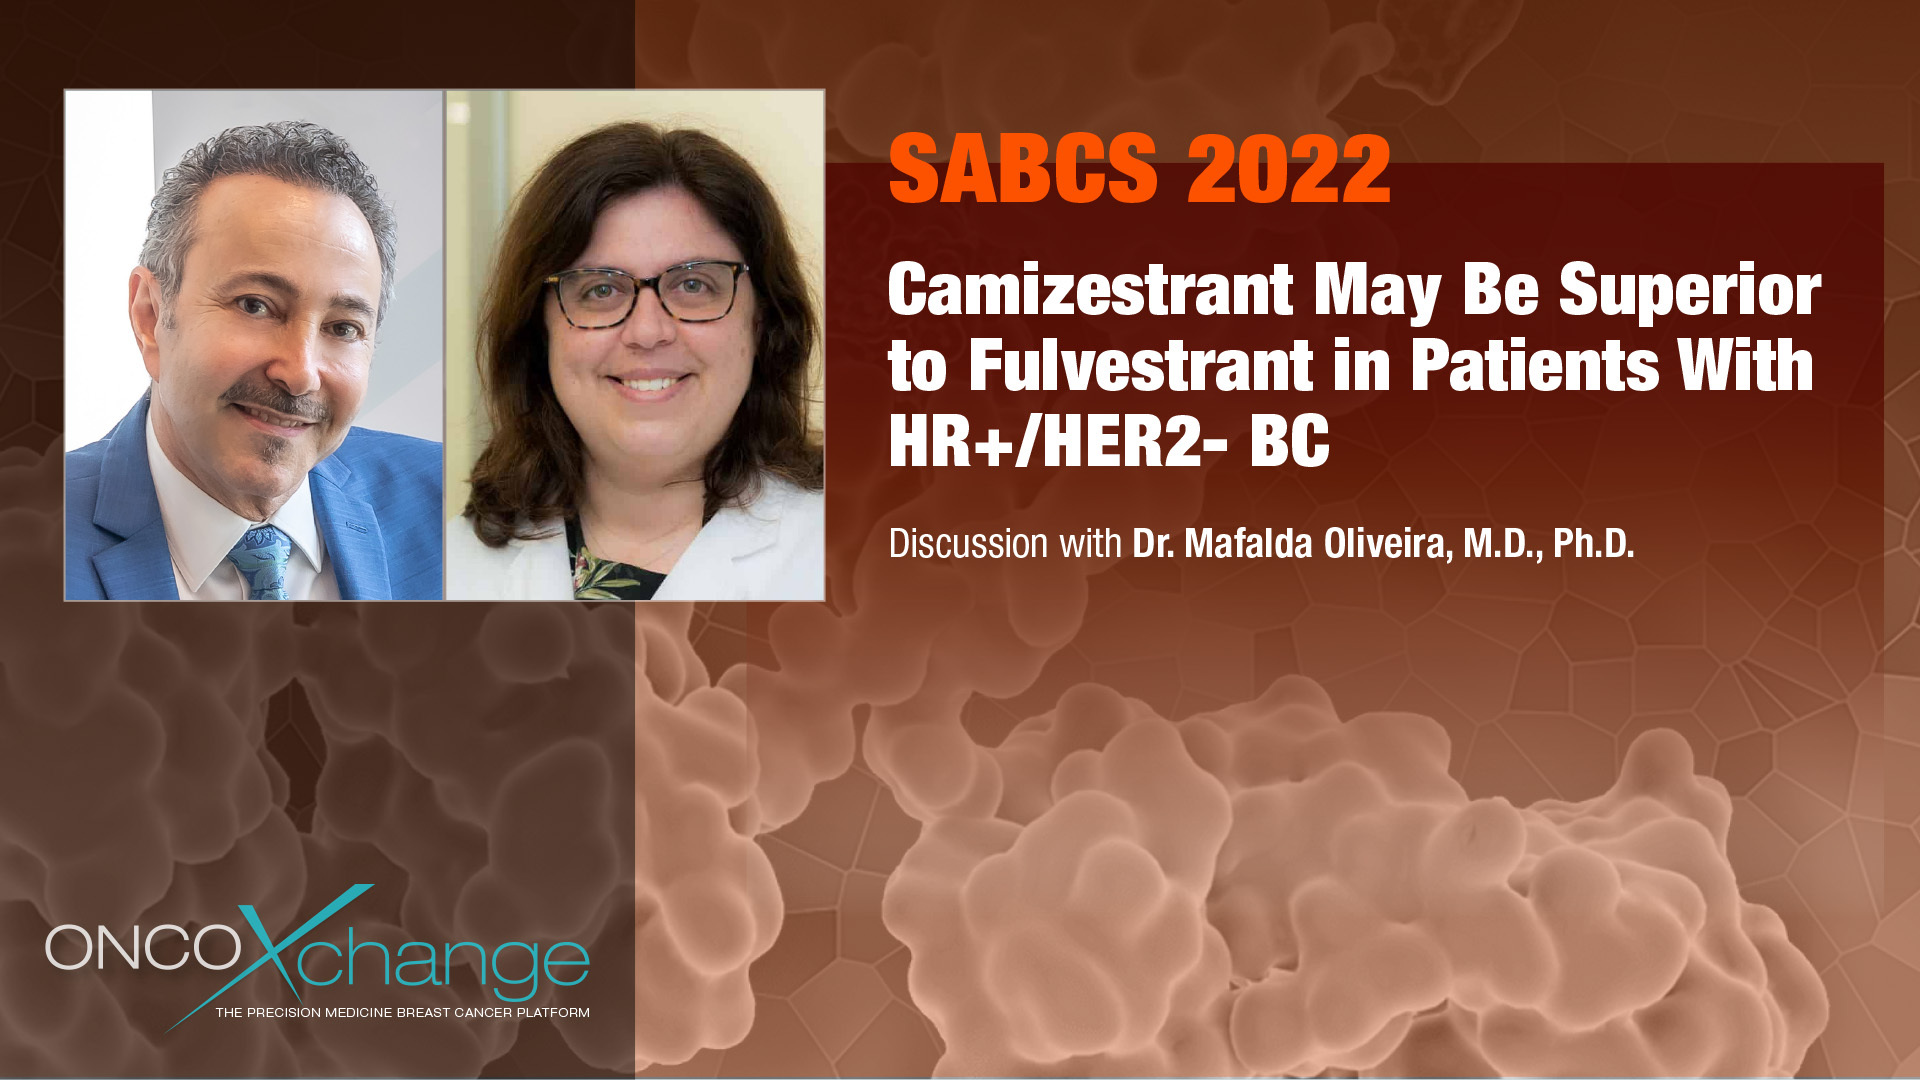 SABCS - Camizestrant May Be Superior to Fulvestrant in Patients With HR+/HER2- BC